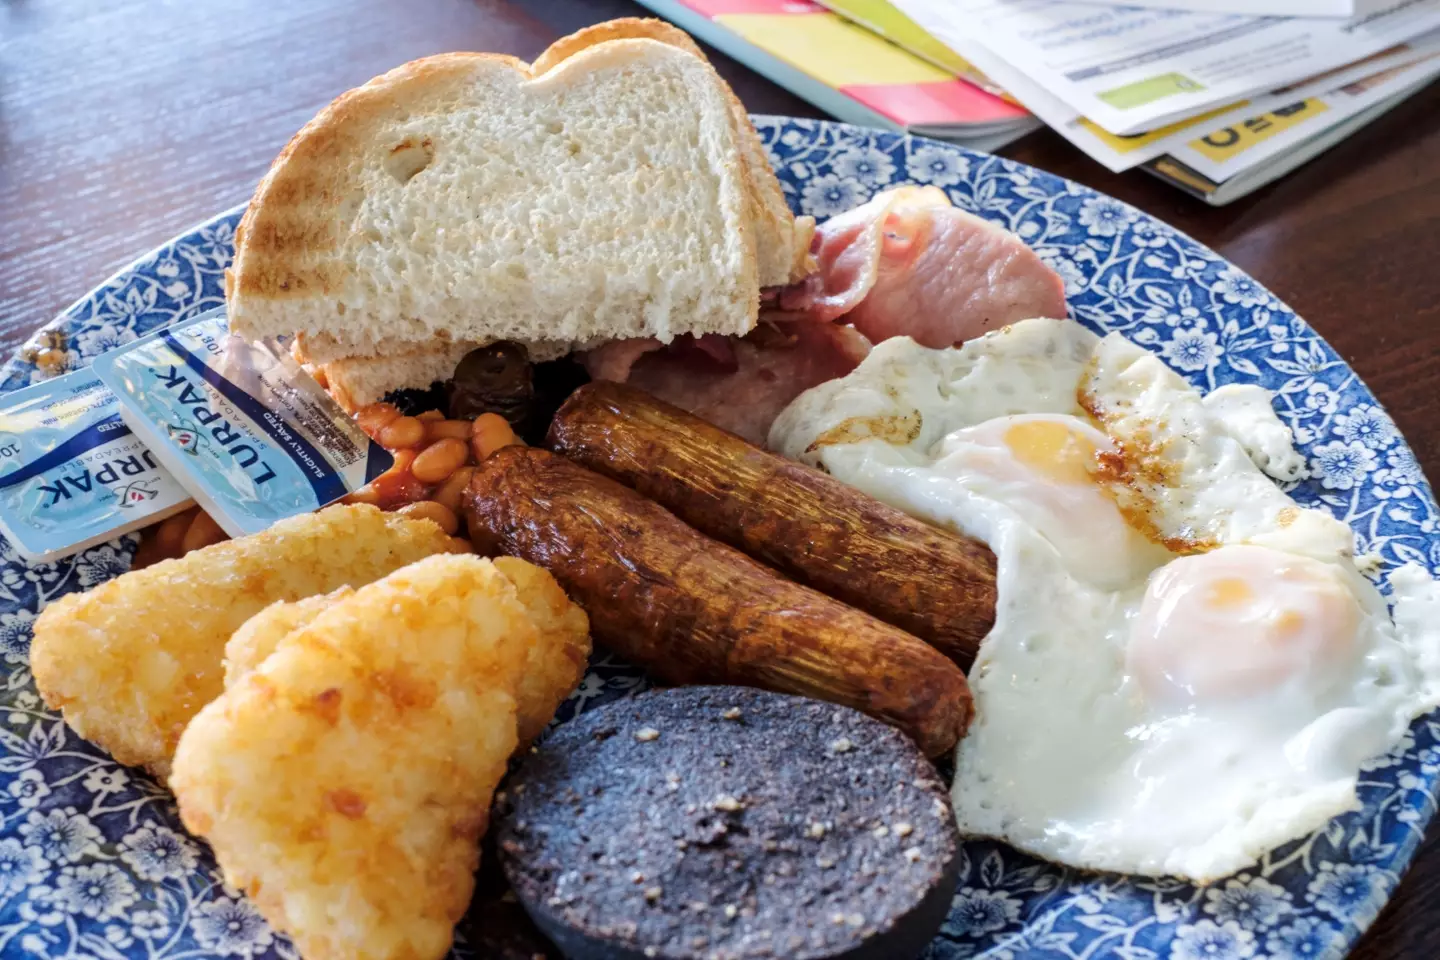 The truth about Wetherspoons' breakfasts has been revealed.